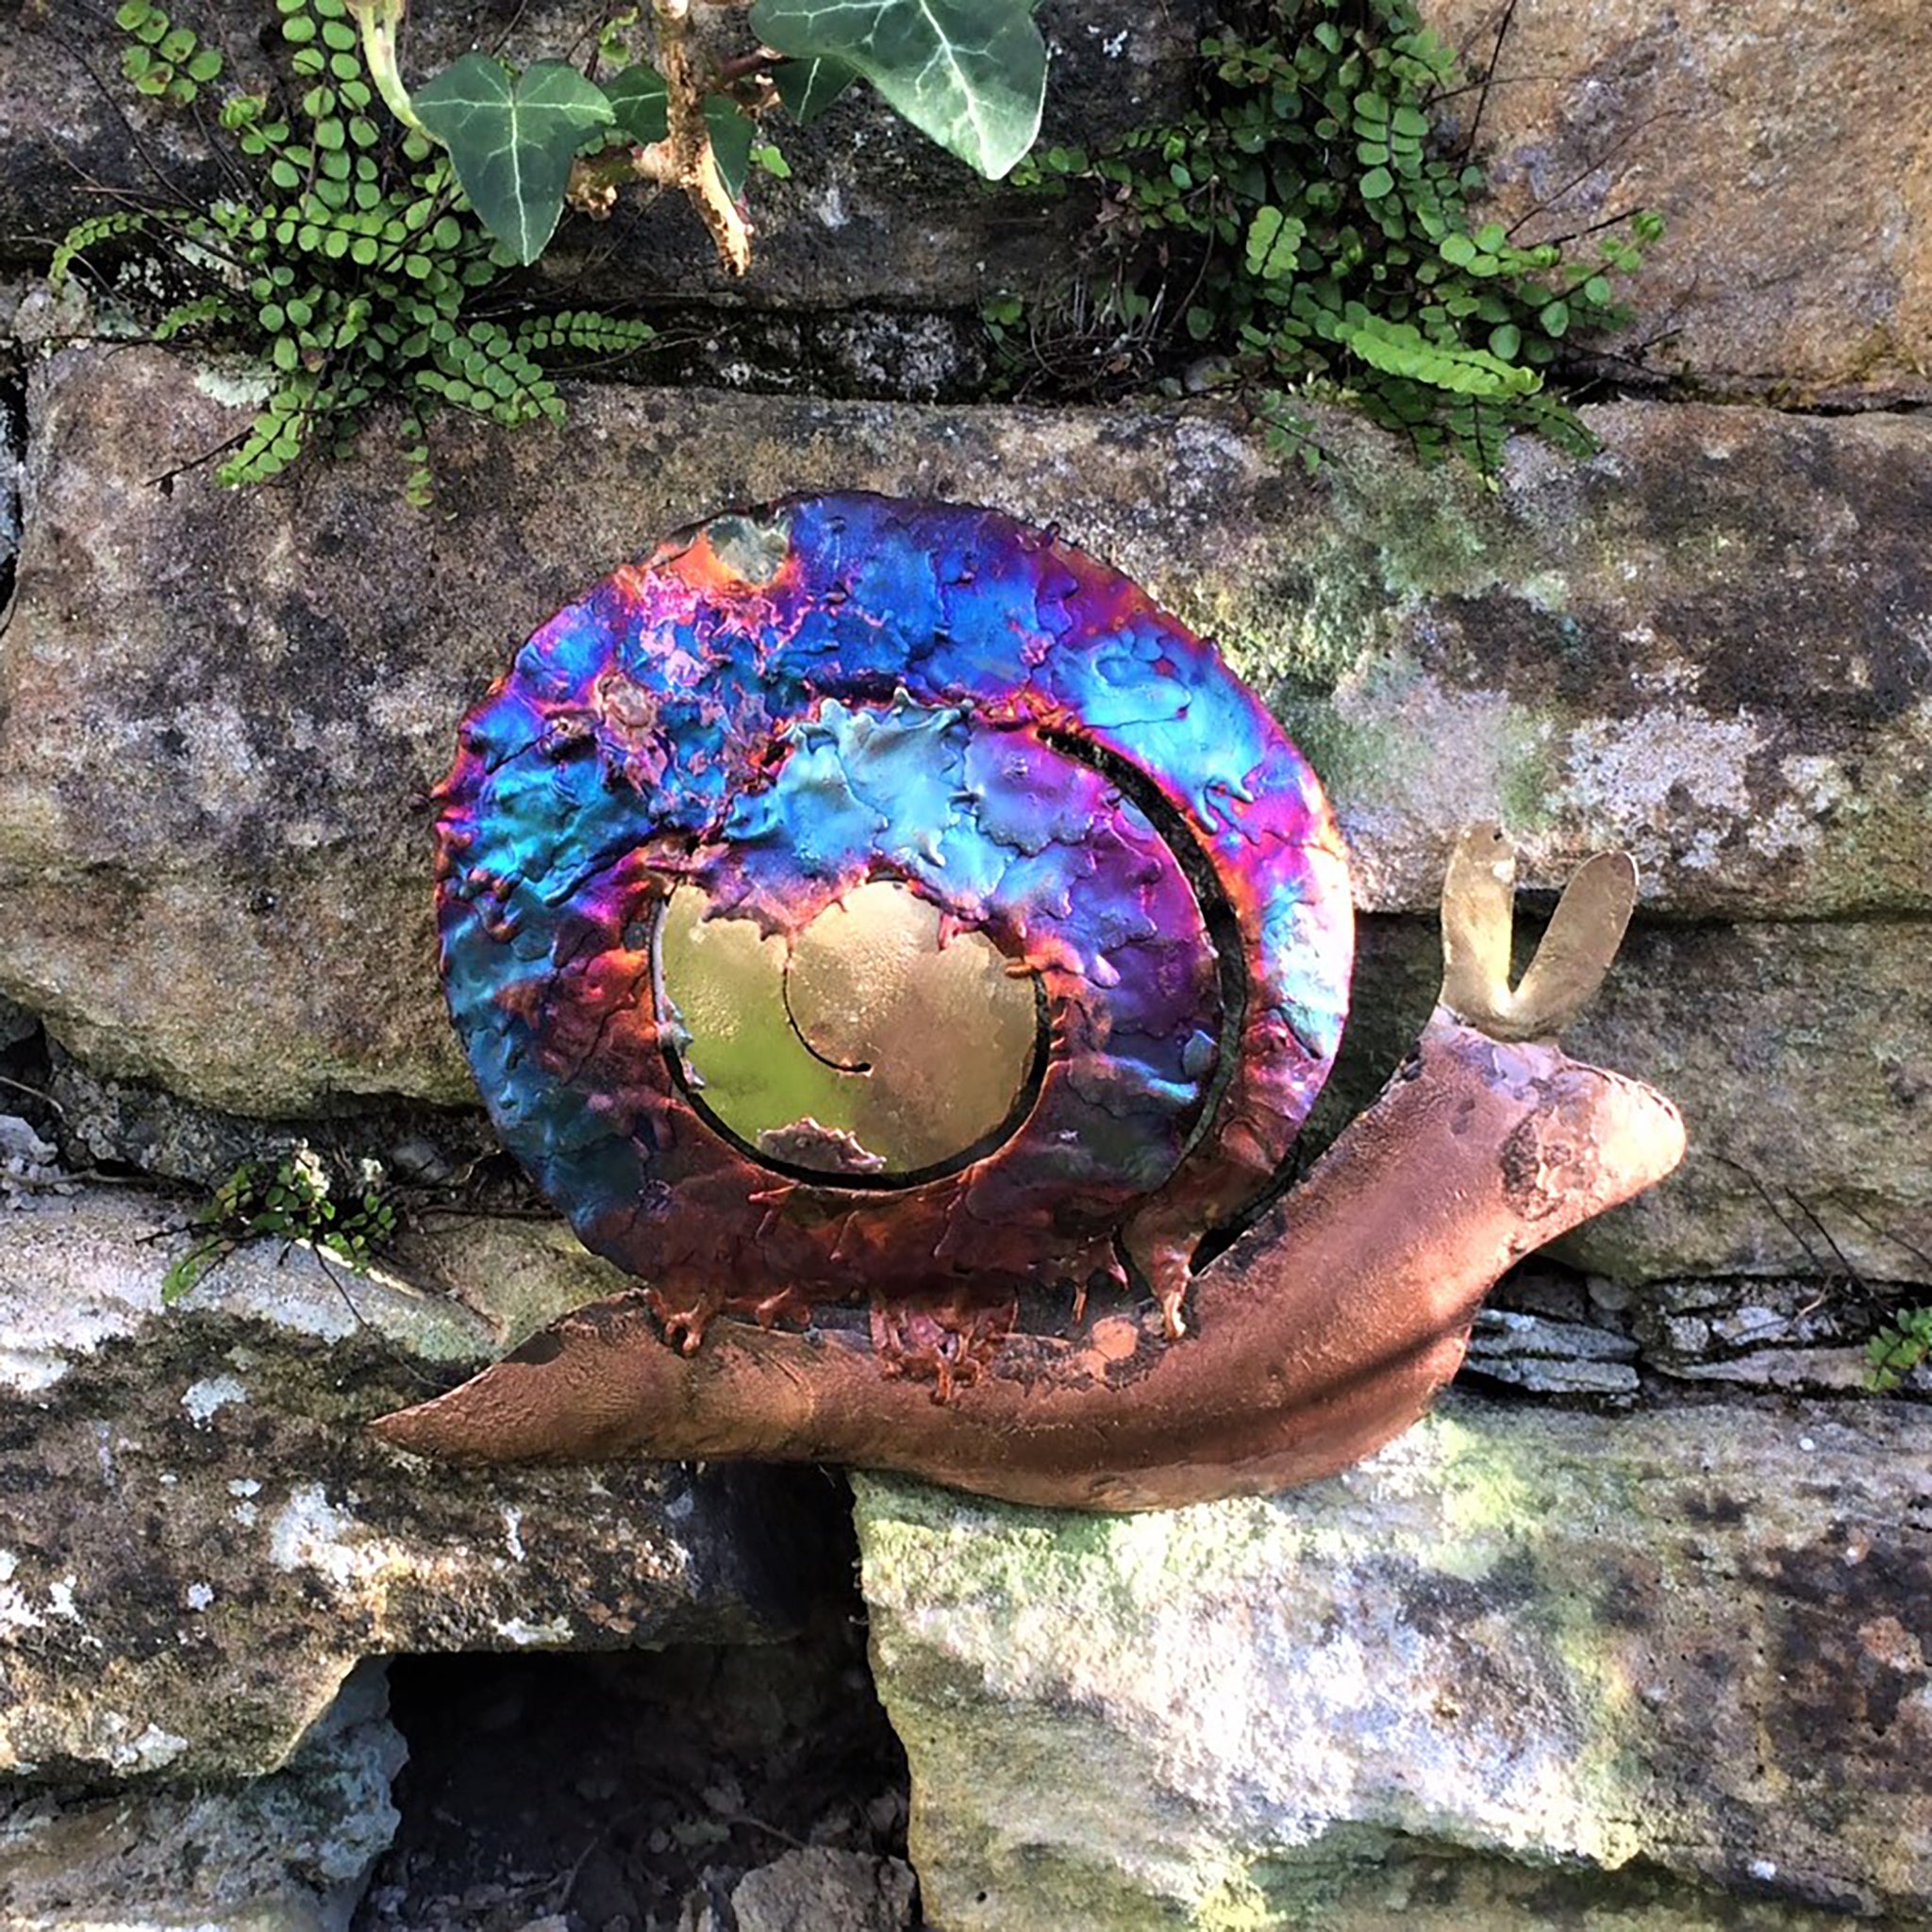 Copper ornamental snail with copper coloured body and iridescent blues, purples, on the curly shell, placed on the garden wall.